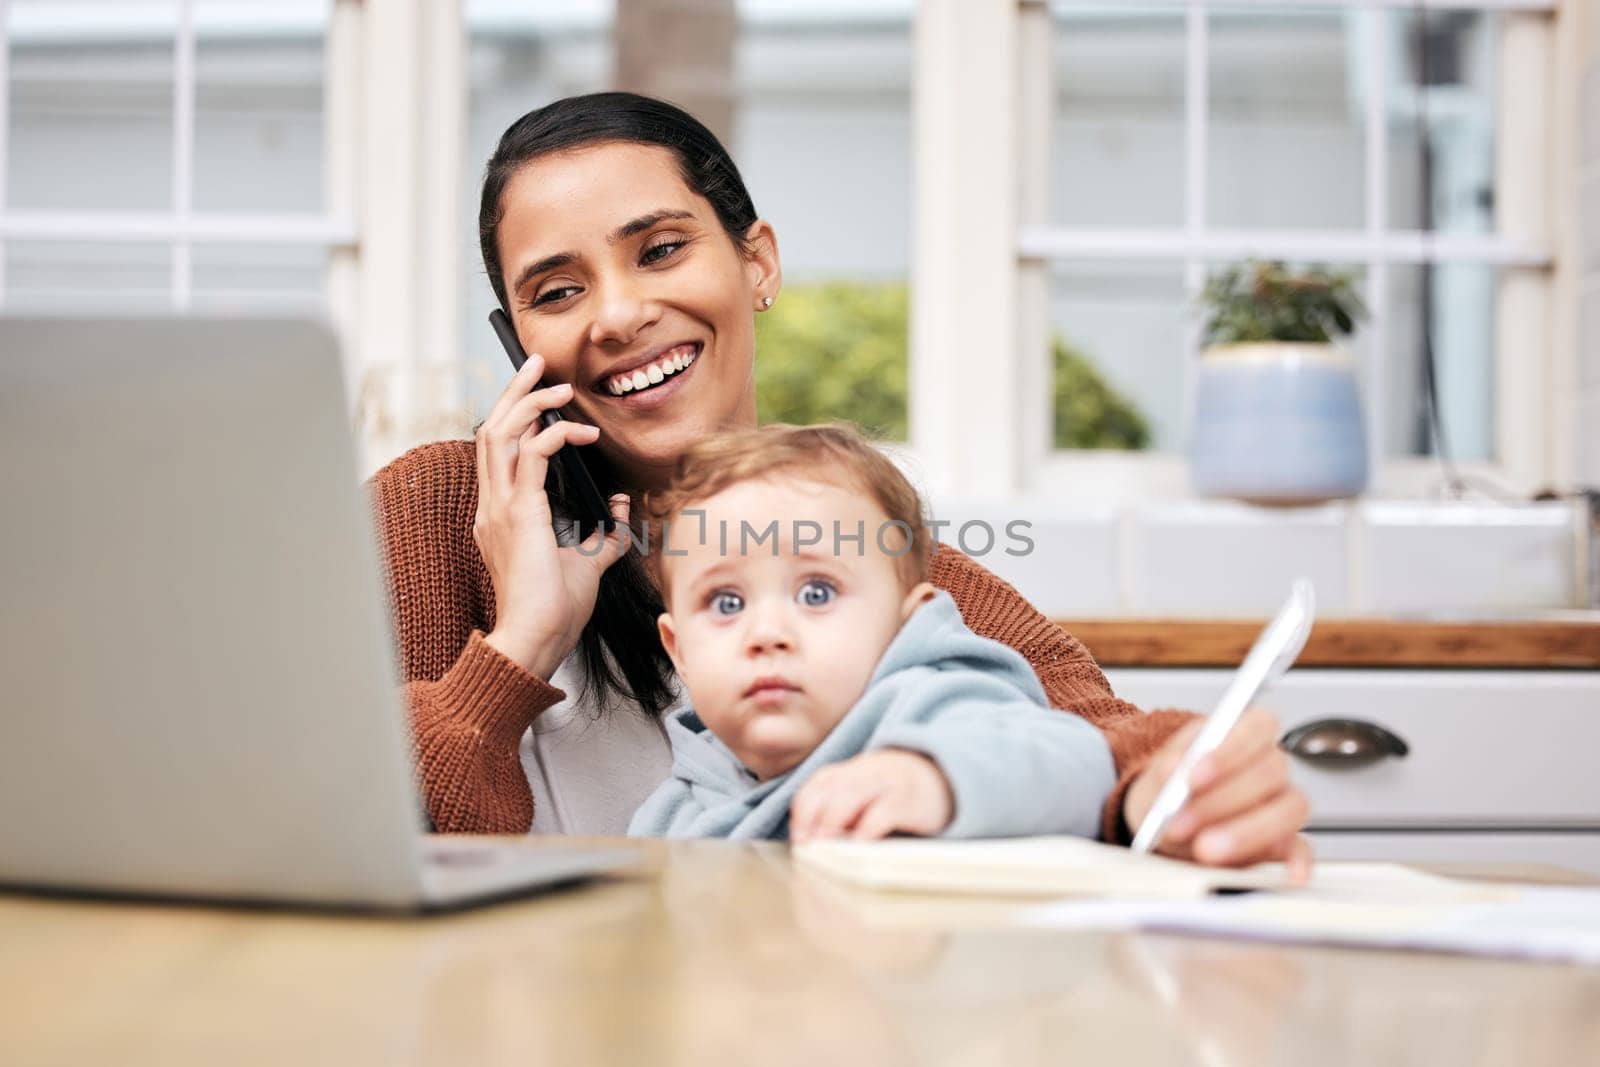 Call, baby and work from home mom with phone, child care and virtual assistant job or family support in multitask. Laptop, cellphone and busy online mother or happy person and kid in freelance career.